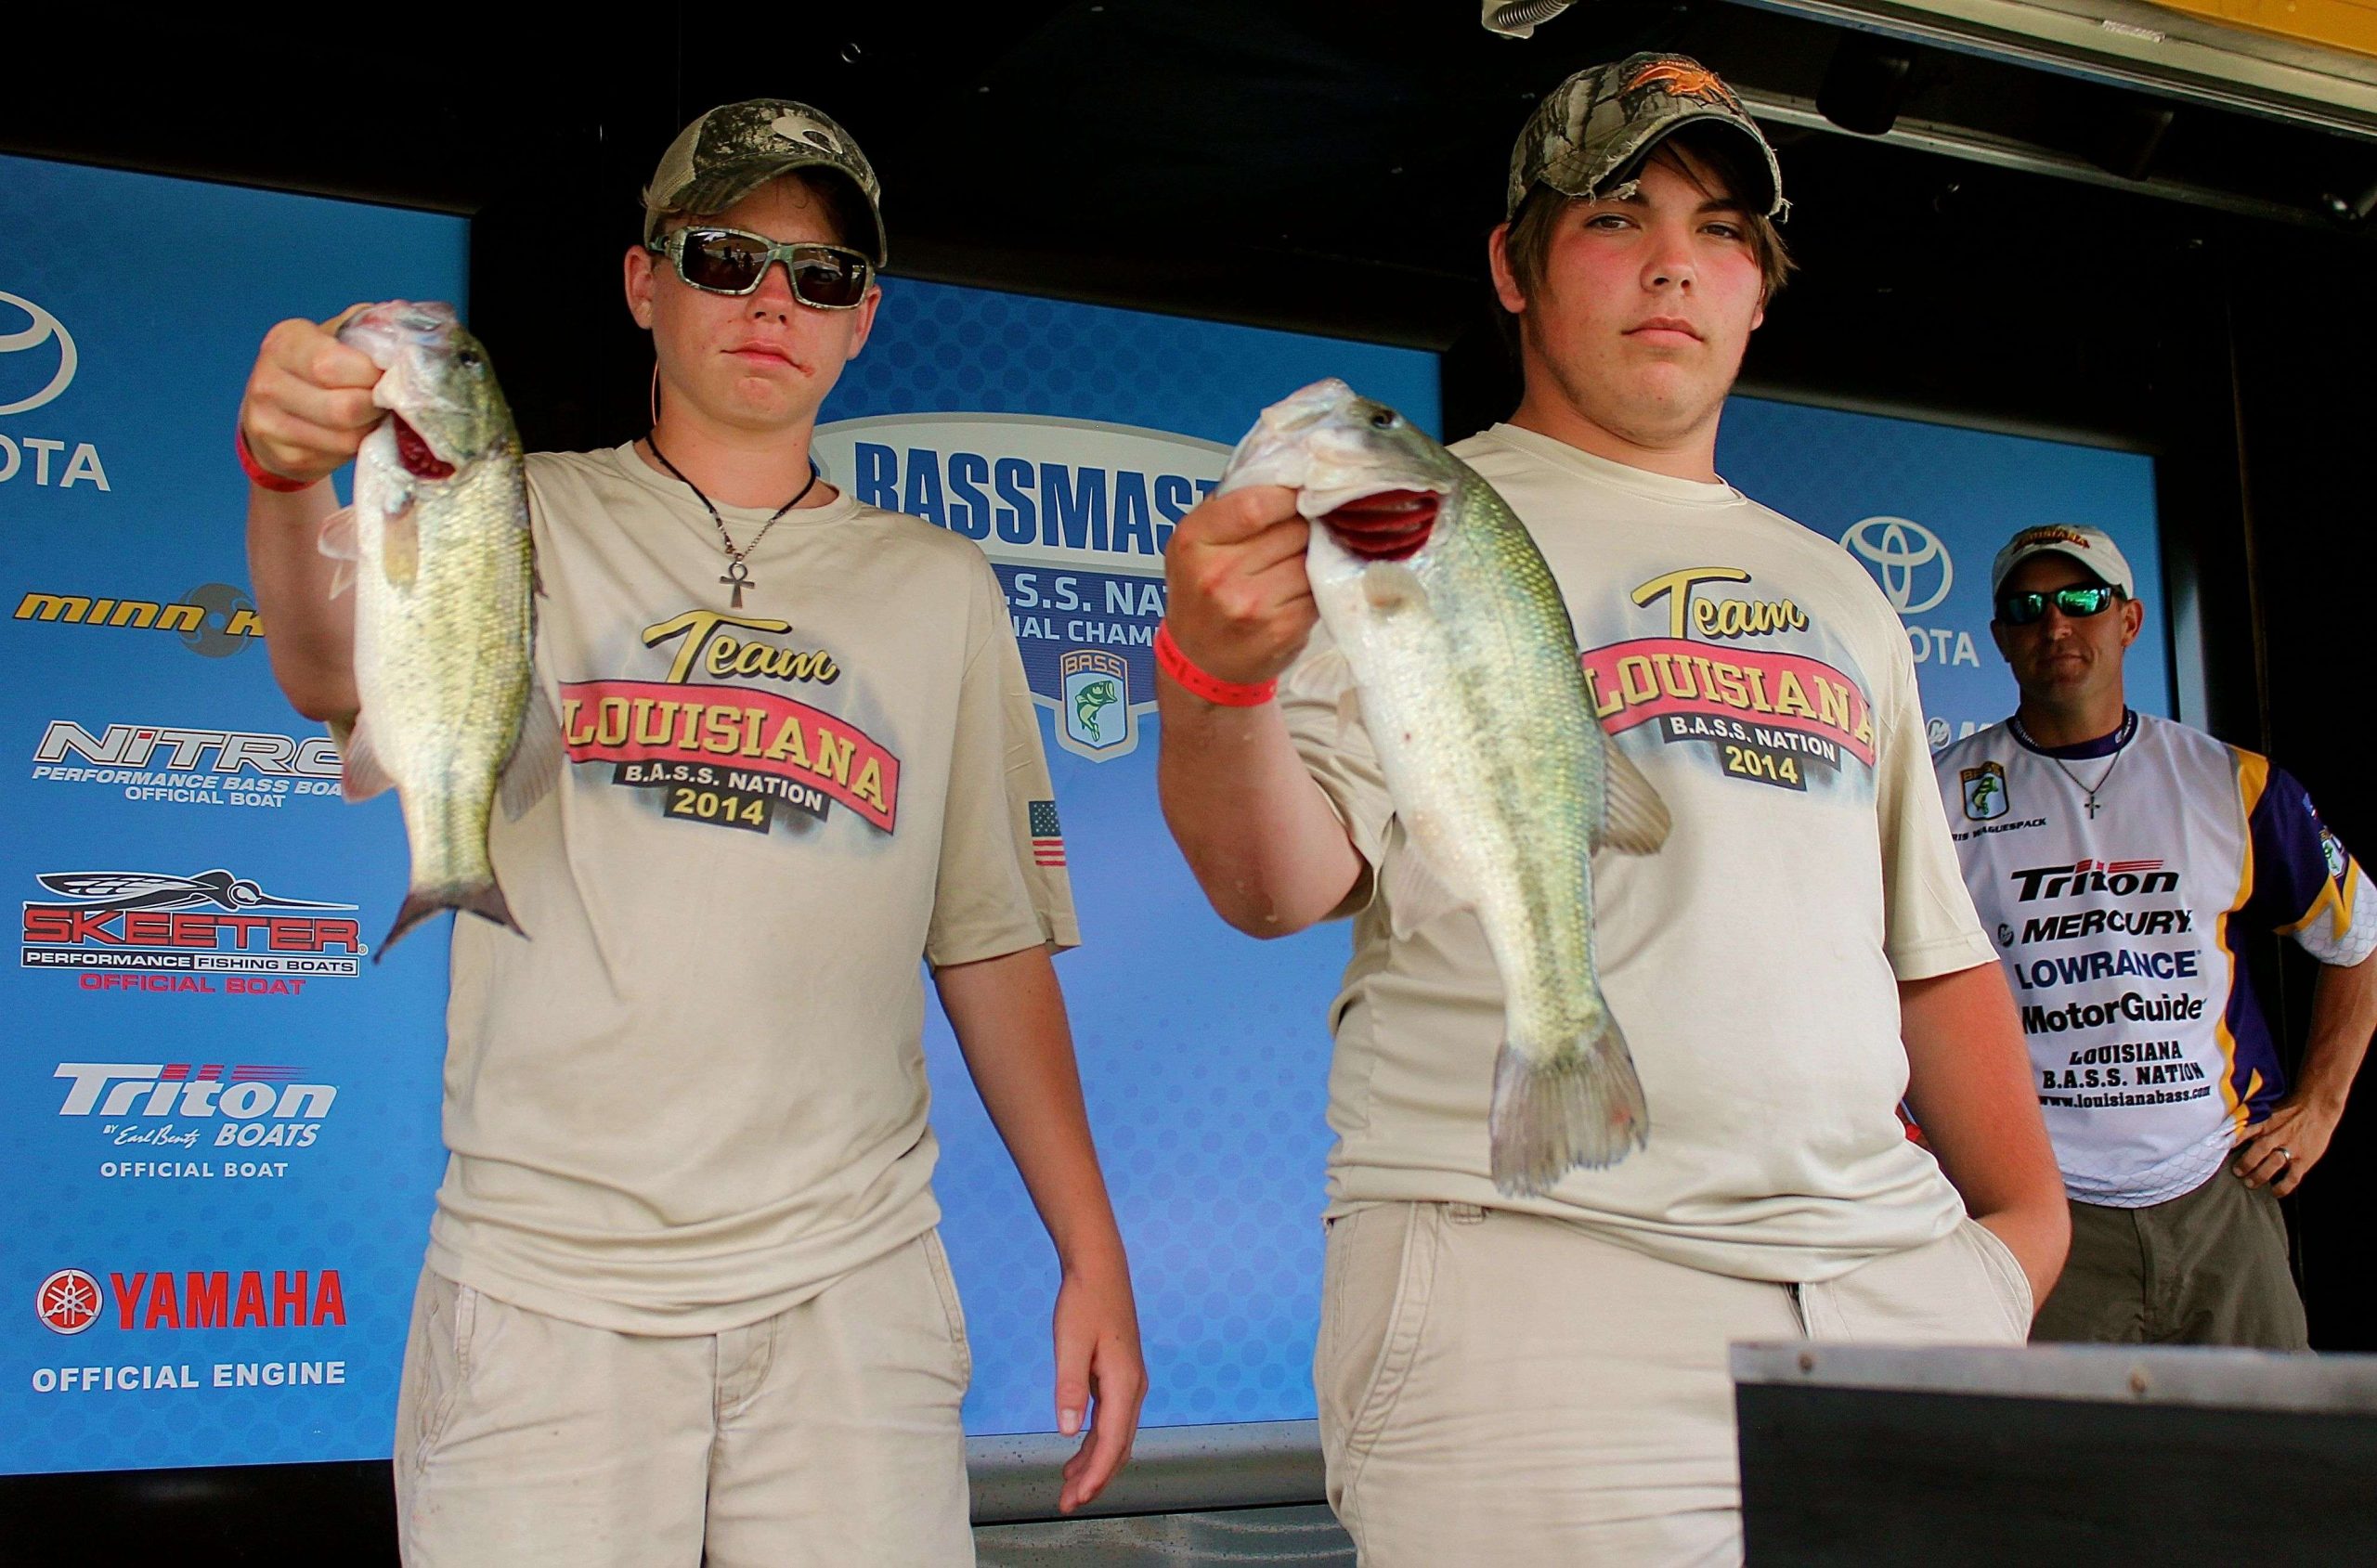 Louisiana high school anglers Kody Kelly and Dillon King caught two bass for 4-8. They represent Livingston Parish Bassmasters.
